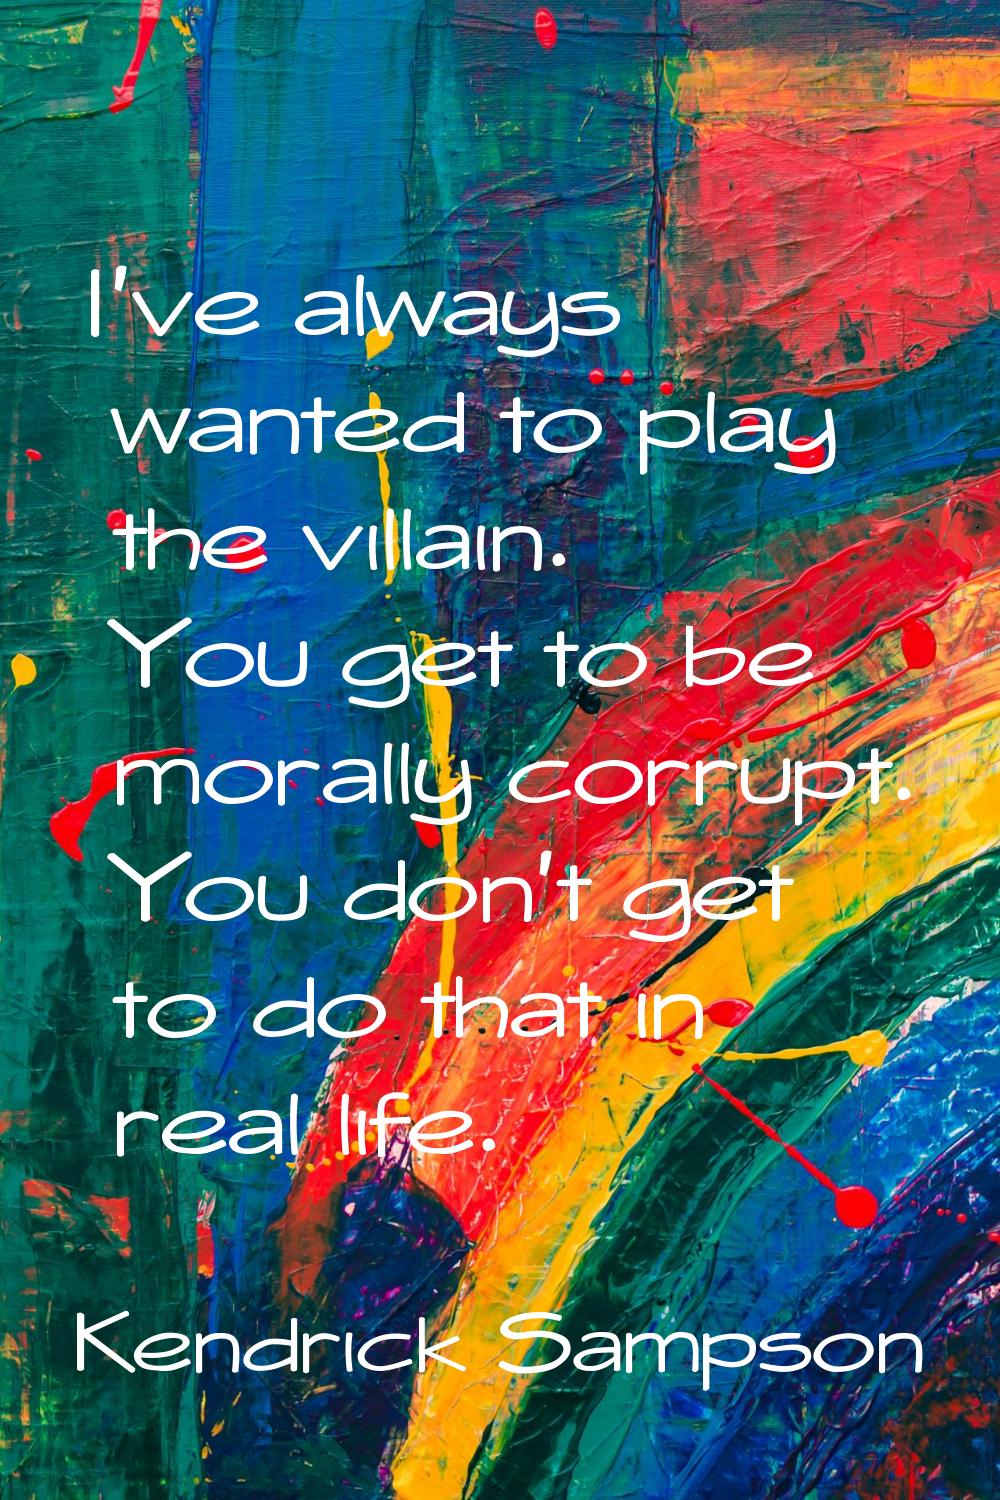 I've always wanted to play the villain. You get to be morally corrupt. You don't get to do that in 